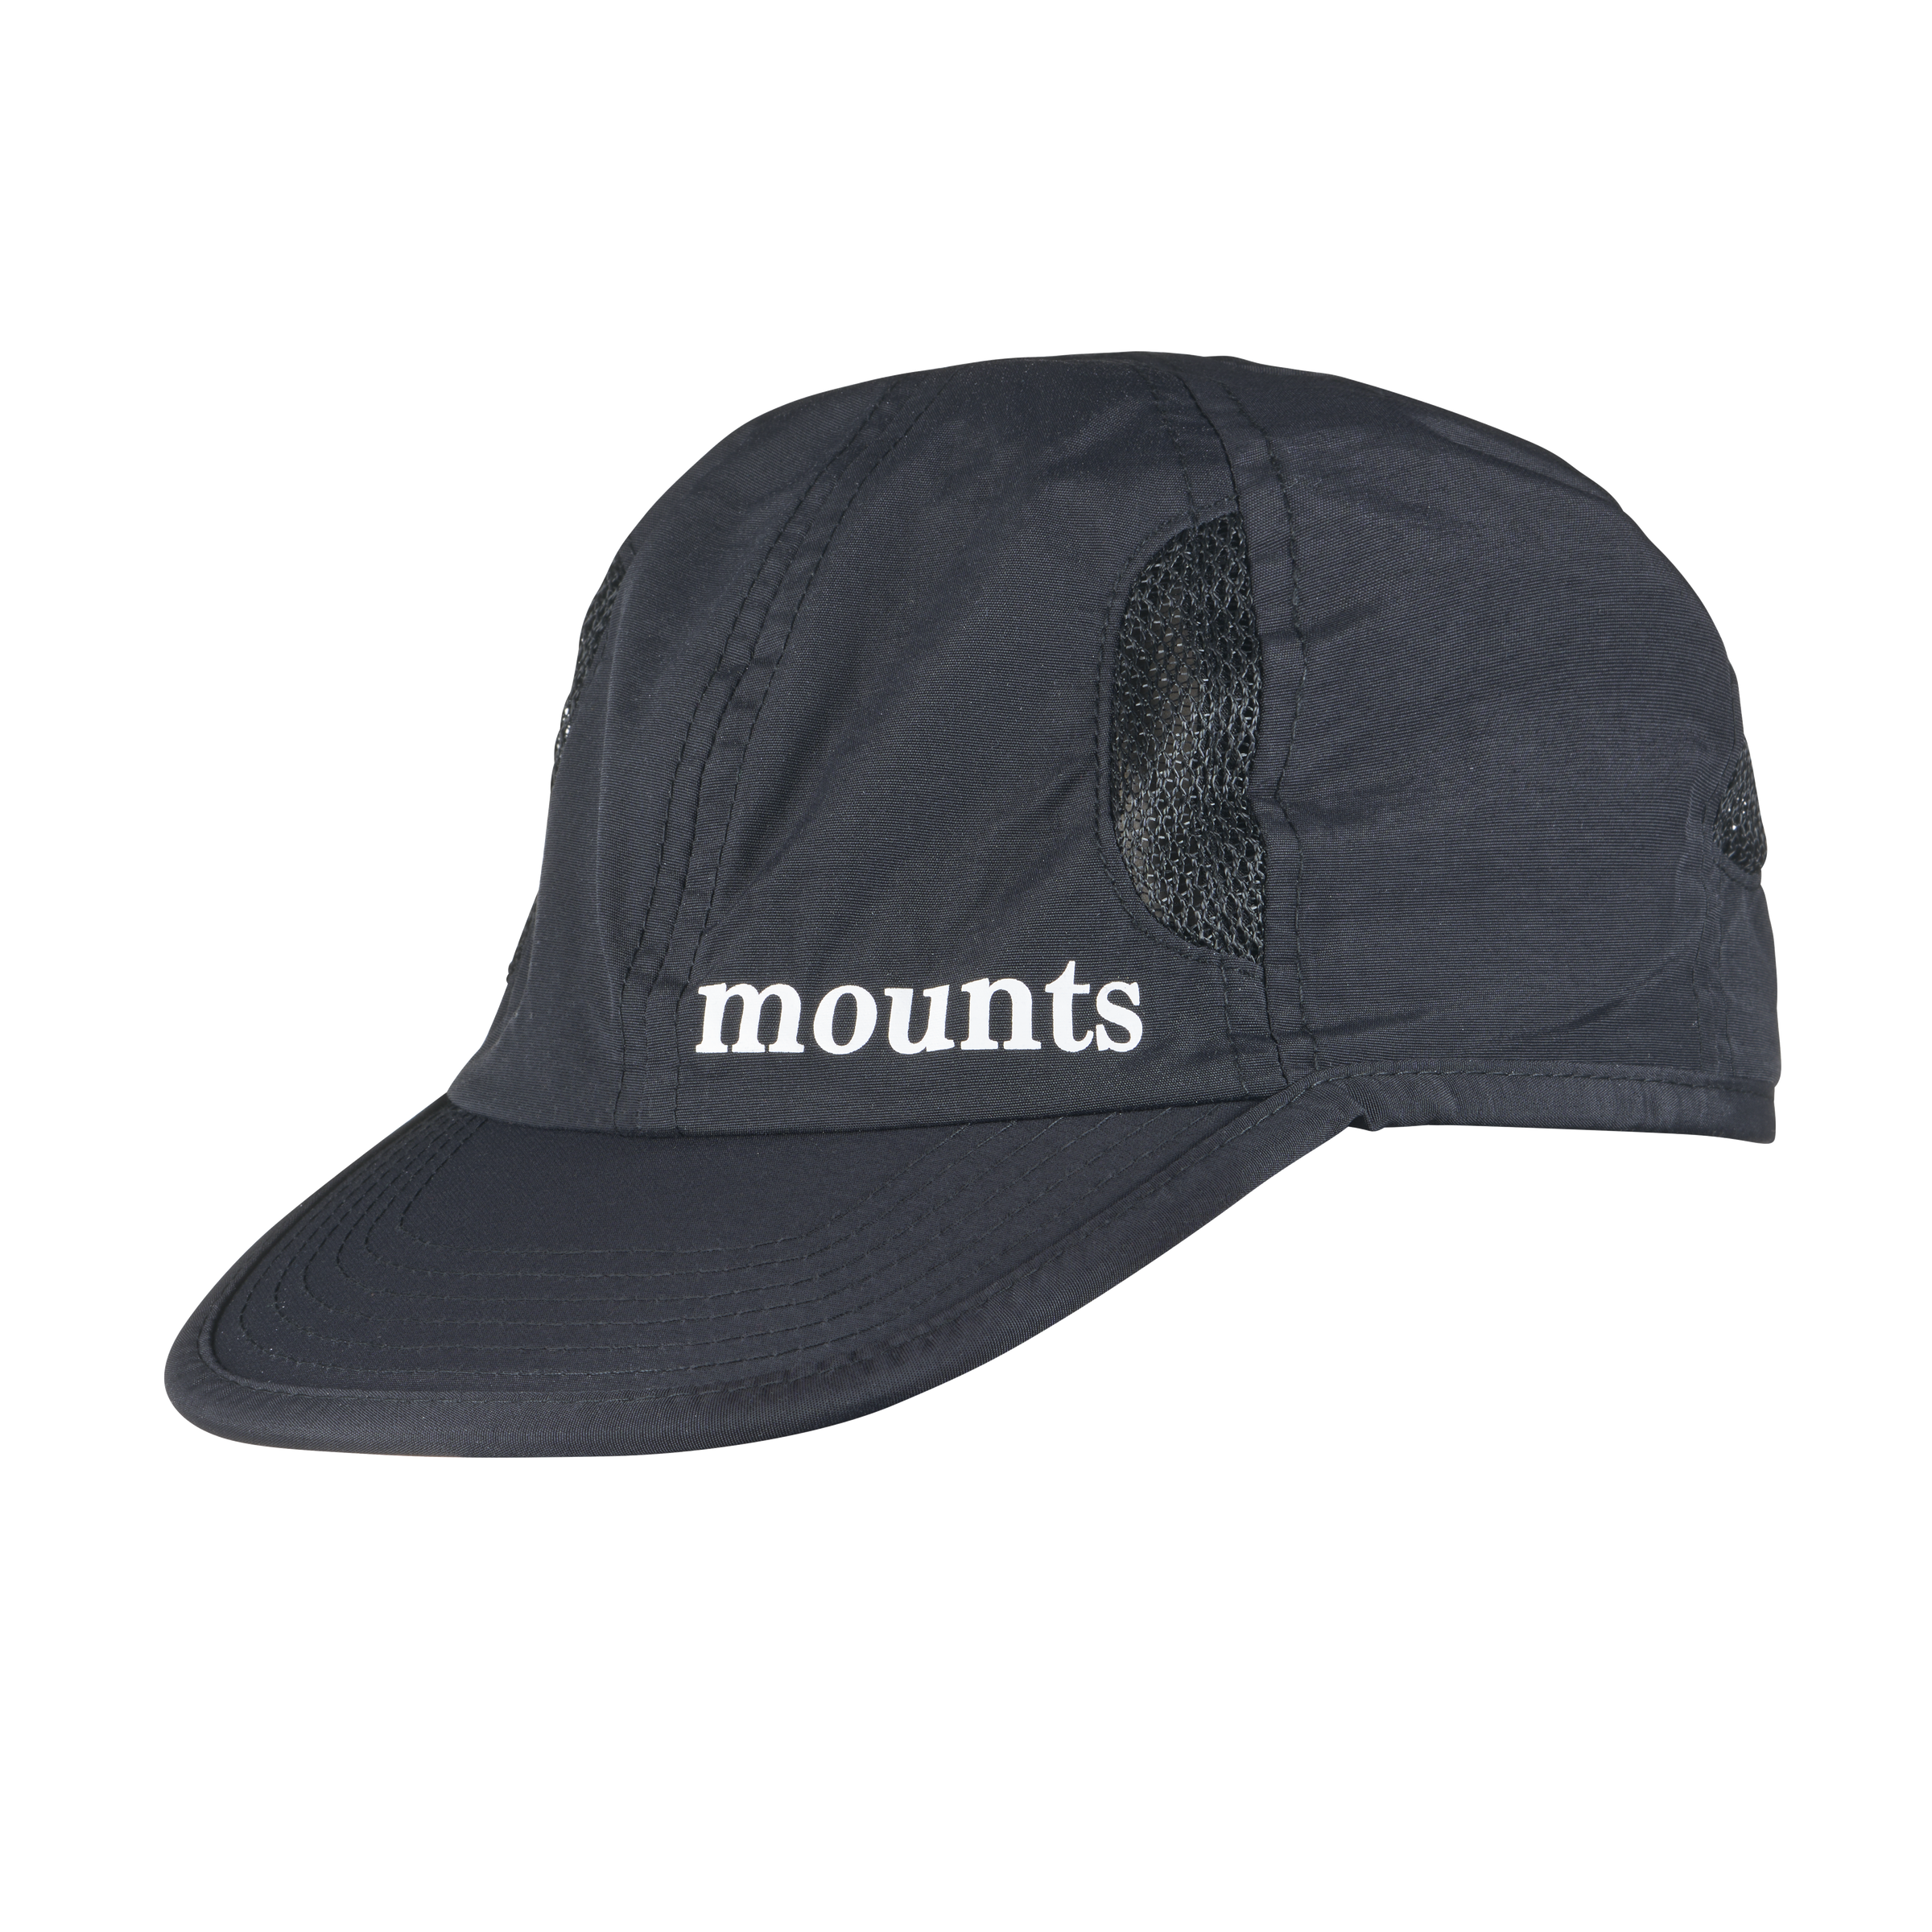 Mounts kids sports hat with velcro 2 to 5 years – Mounts - Baby & Toddler  Outdoor Equipment and Apparel